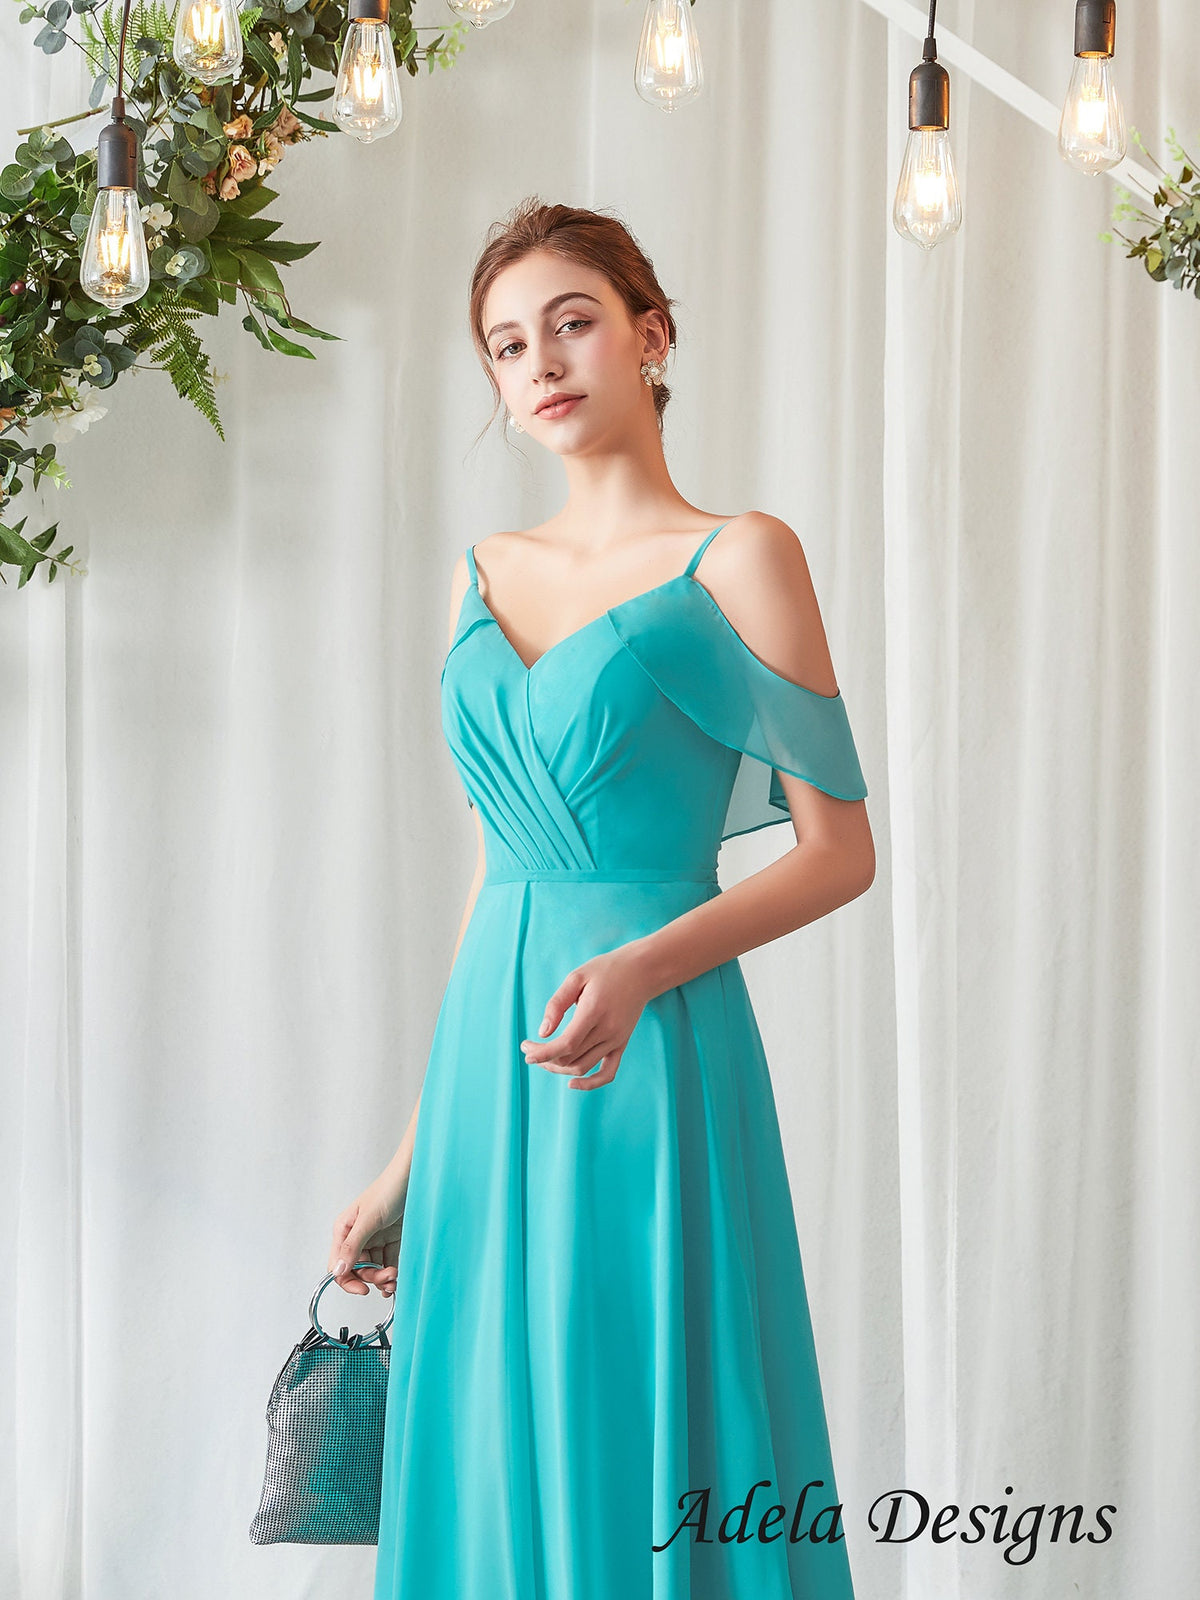 Cold Shoulder Sleeves Boho Bridesmaid Dress Formal Gown Prom Evening Gala Dress Aline Chiffon Fabric V Neck Open Back Beach Style Flowy